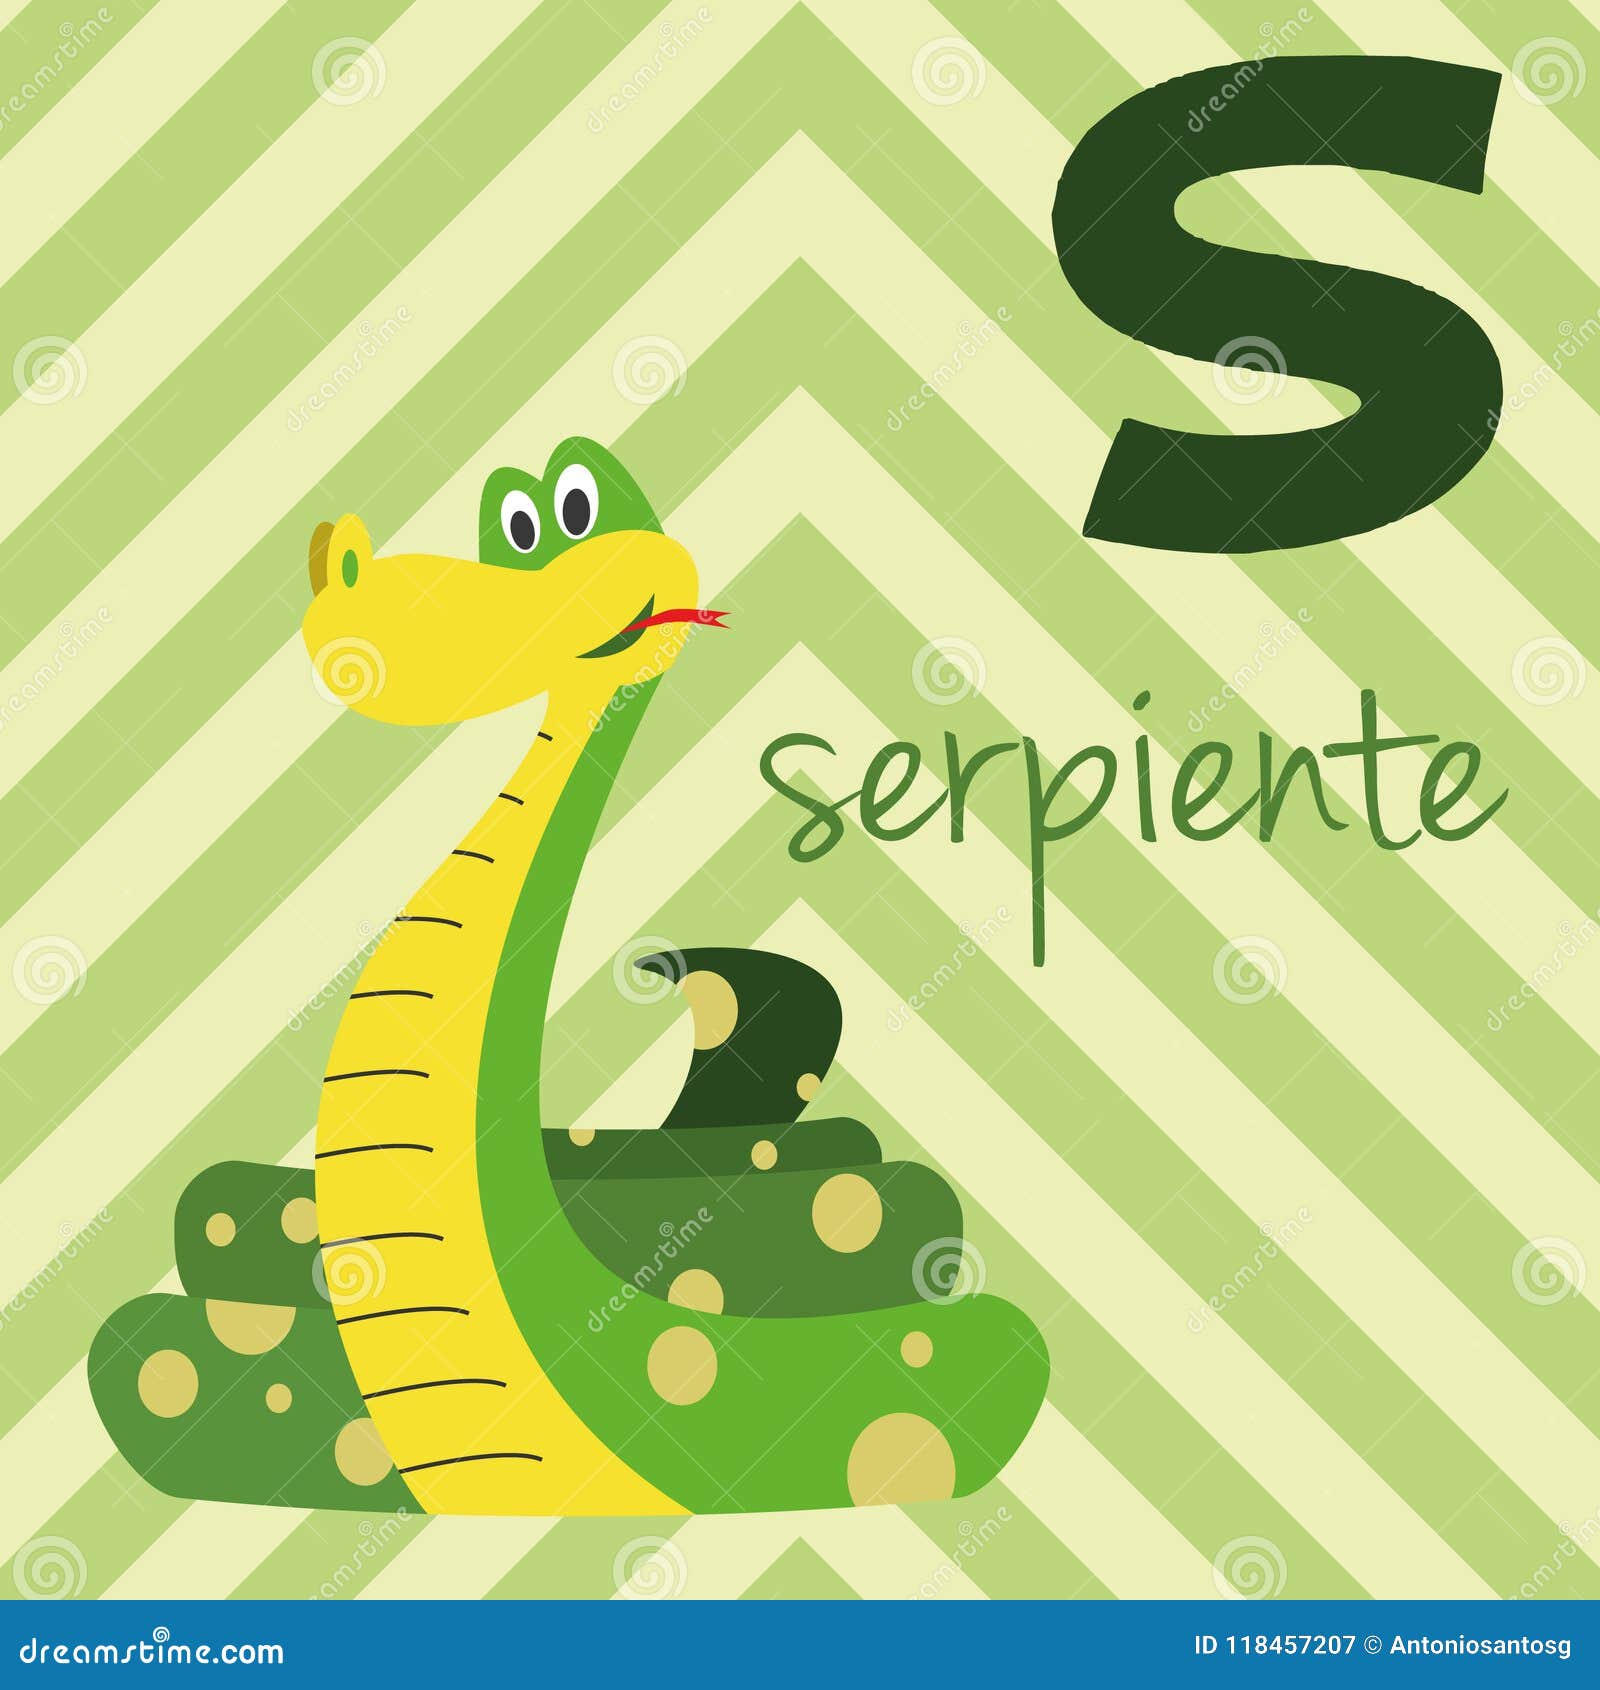 cute cartoon zoo illustrated alphabet with funny animals. spanish alphabet: s for serpiente.